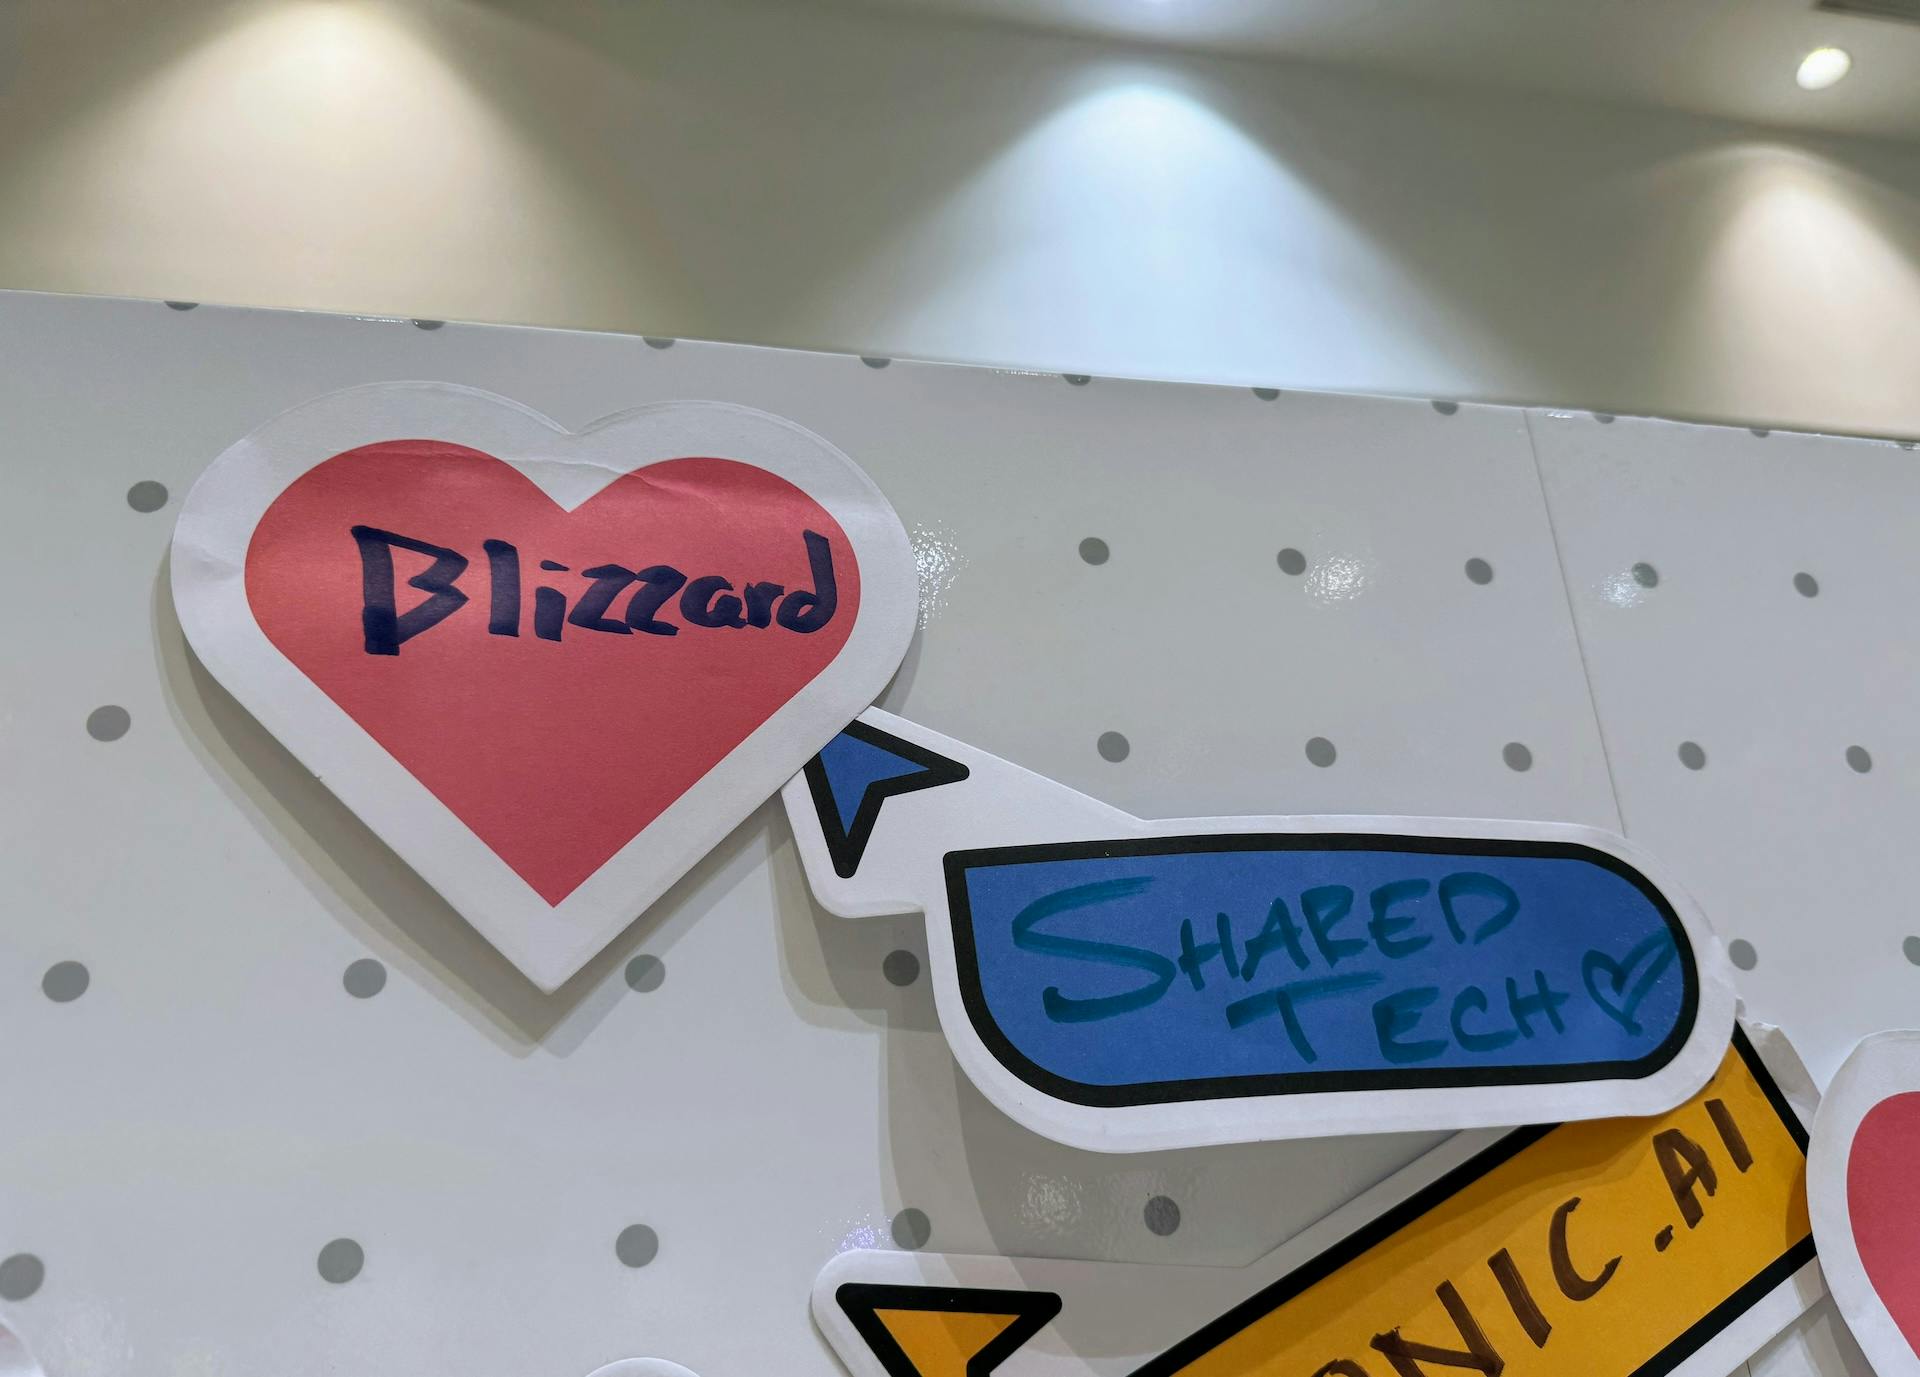 Two stickers on a board that read 'Blizzard' and 'Shared Tech'.